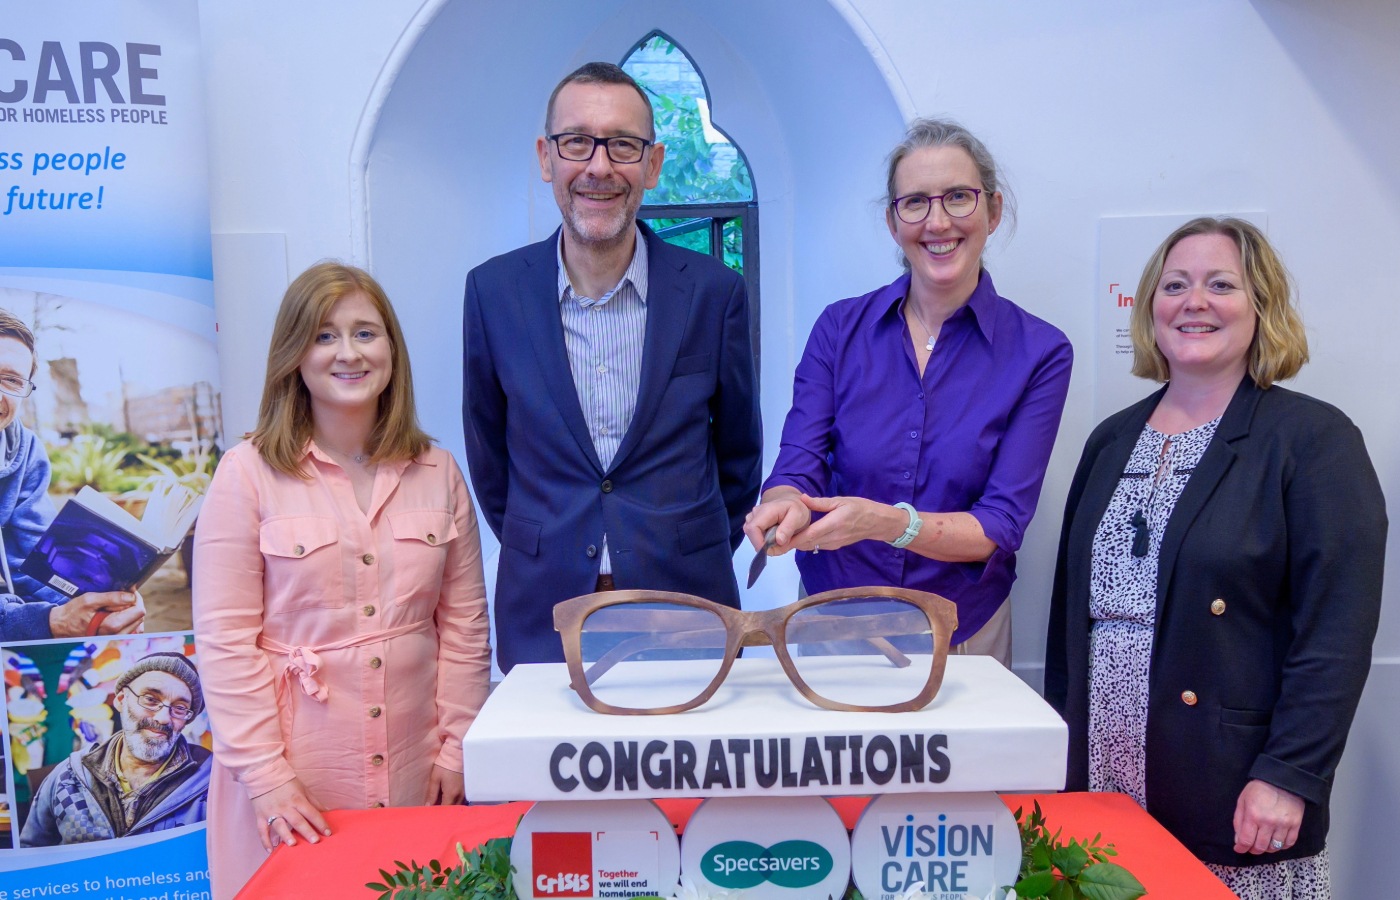 The Wellness Floor has been funded by Specsavers and, alongside the bespoke eye clinic, includes additional rooms, which will enable Crisis to broaden the health services it provides to members.